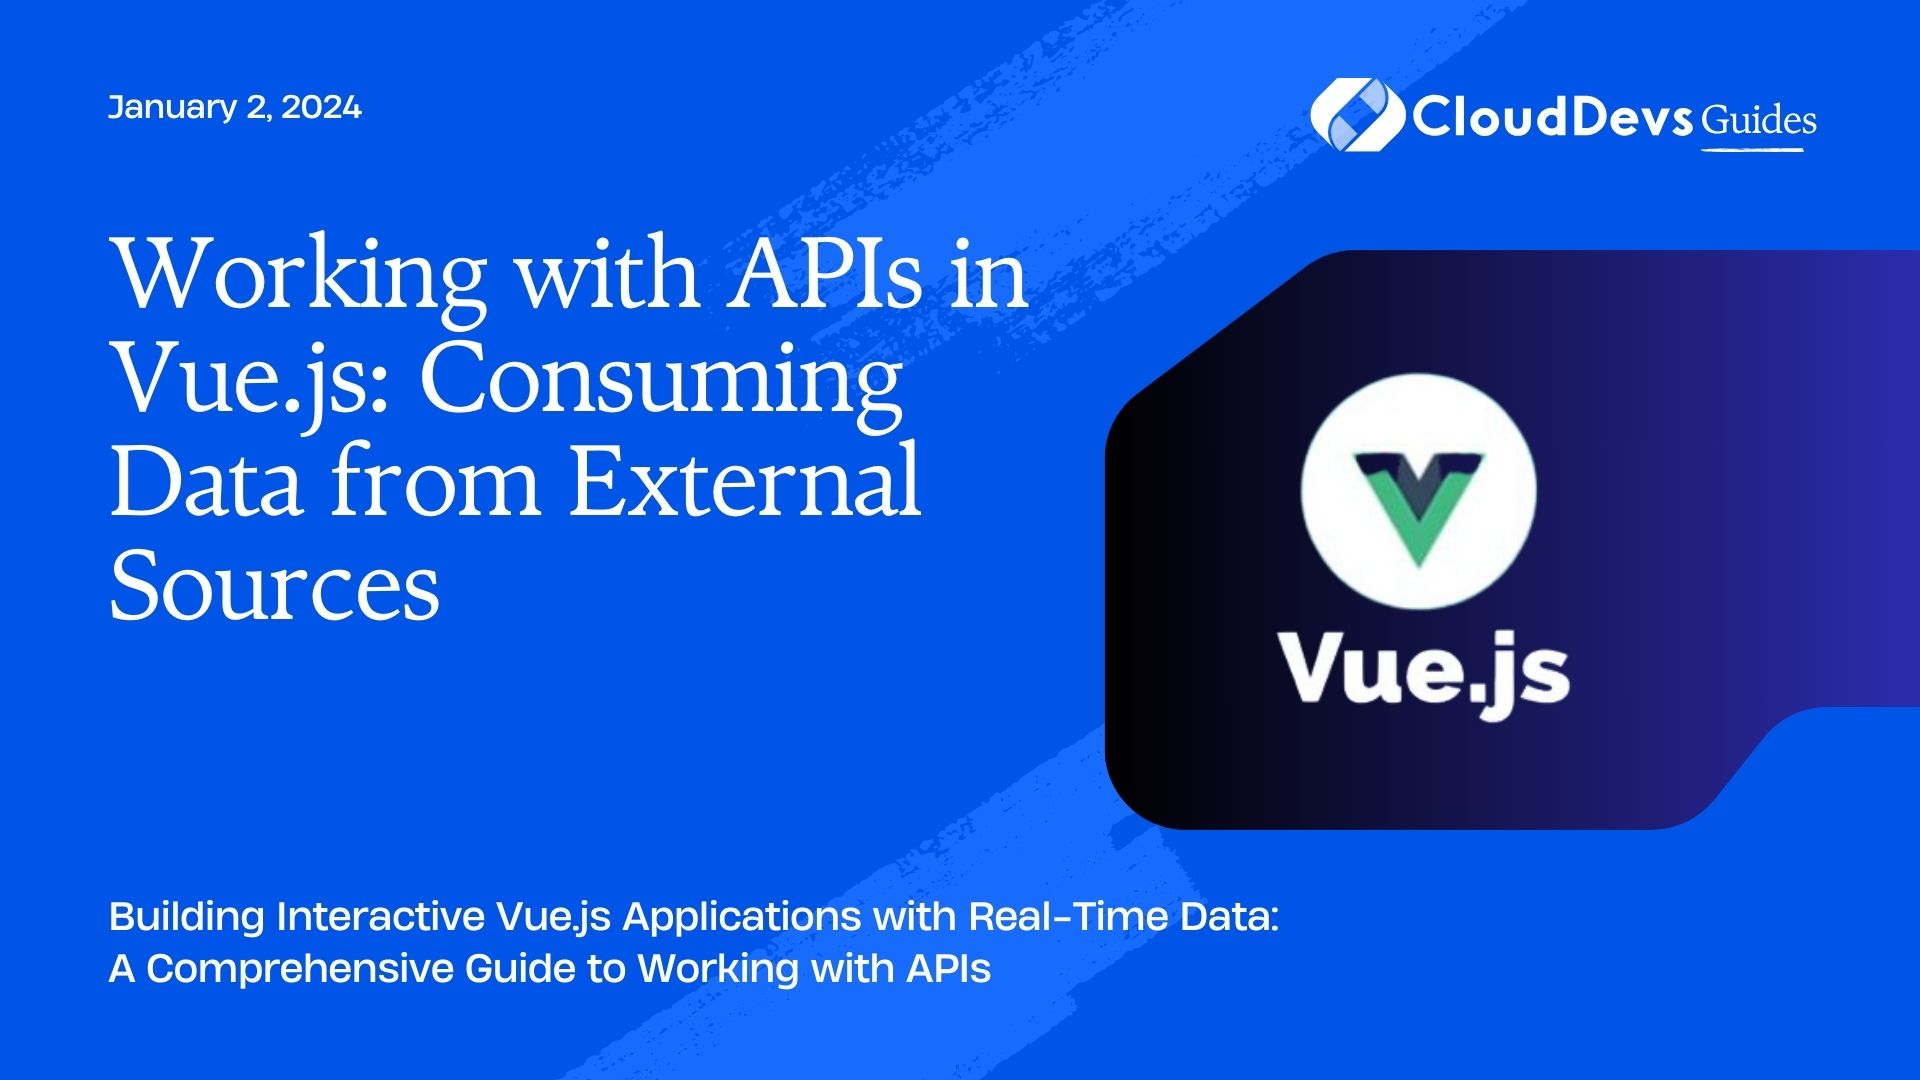 Working with APIs in Vue.js: Consuming Data from External Sources